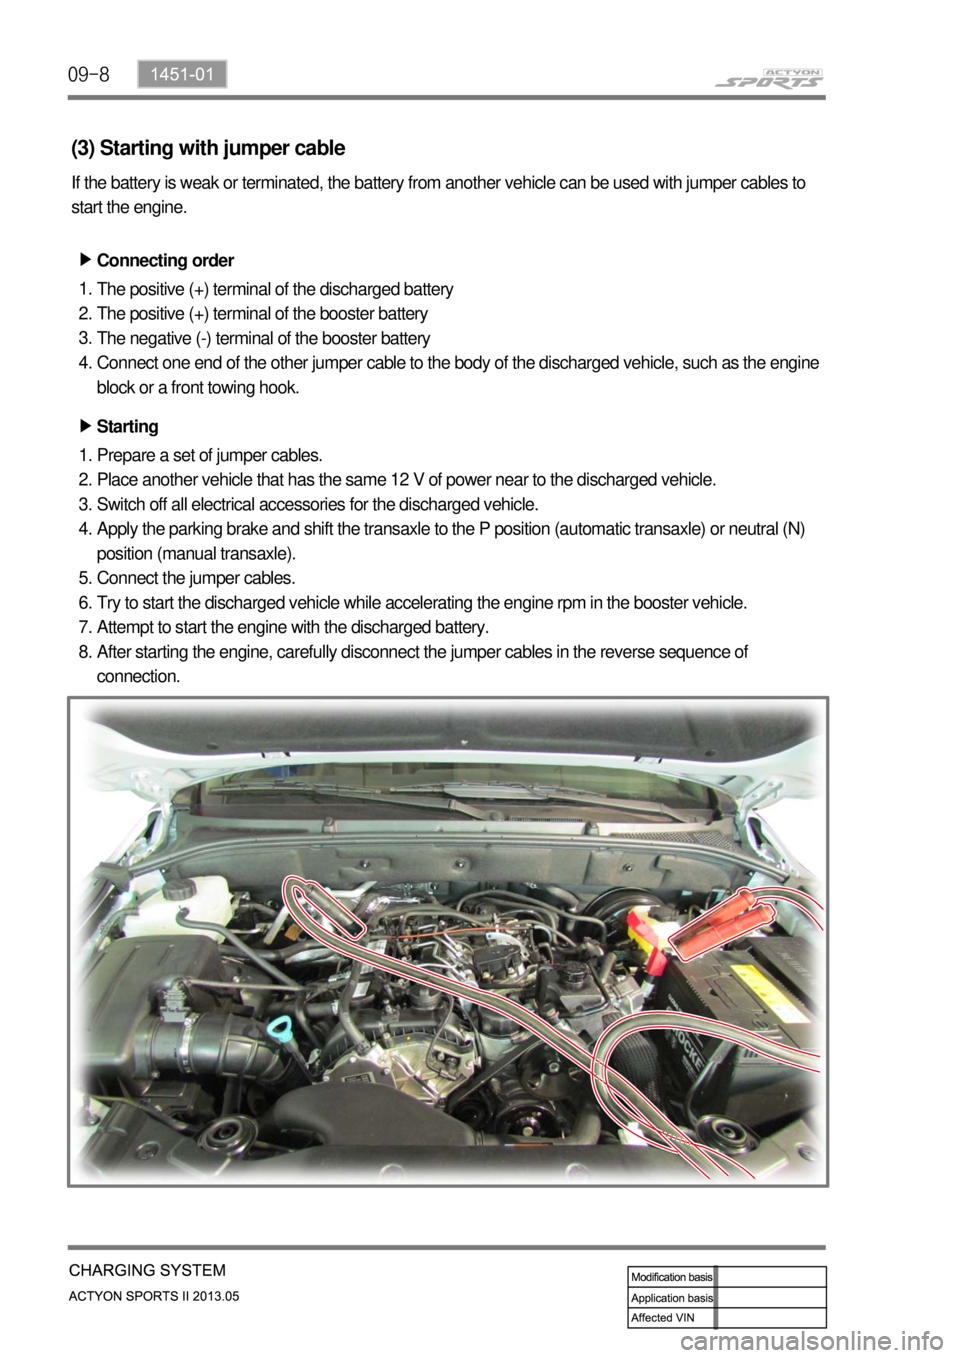 SSANGYONG NEW ACTYON SPORTS 2013  Service Manual 09-8
(3) Starting with jumper cable
If the battery is weak or terminated, the battery from another vehicle can be used with jumper cables to 
start the engine.
Connecting order ▶
The positive (+) te